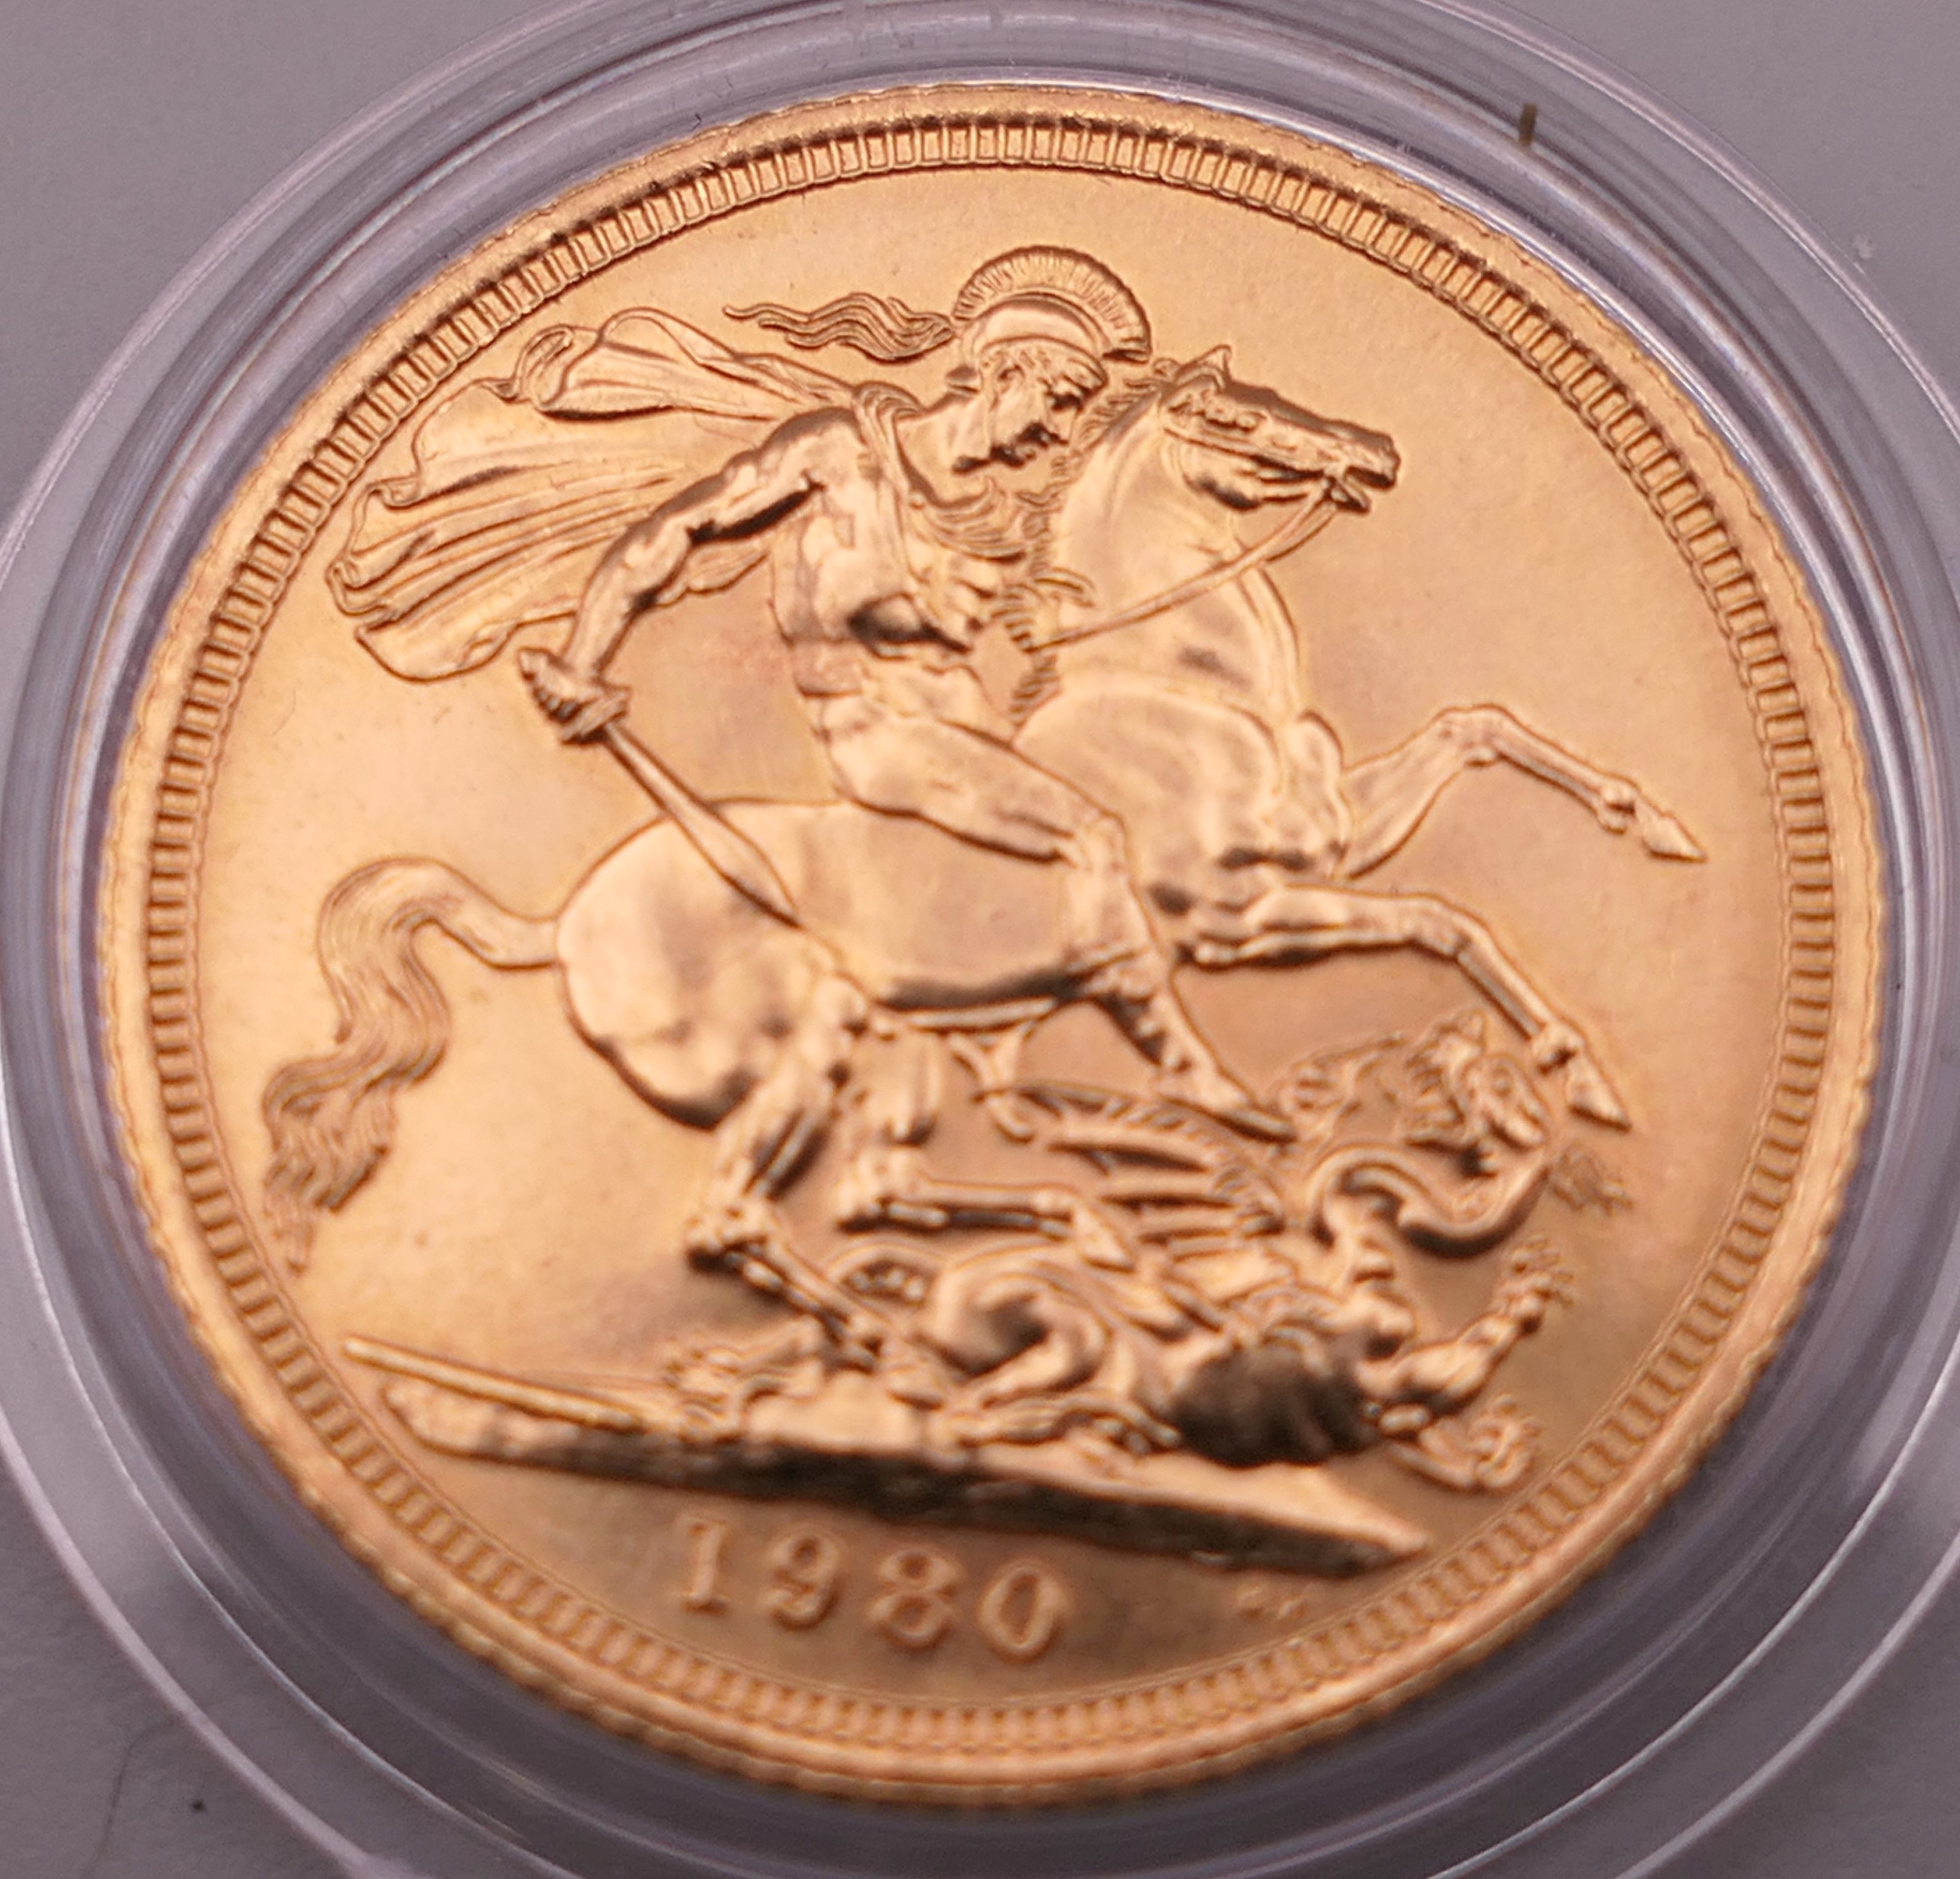 A 1980 gold sovereign. - Image 2 of 2